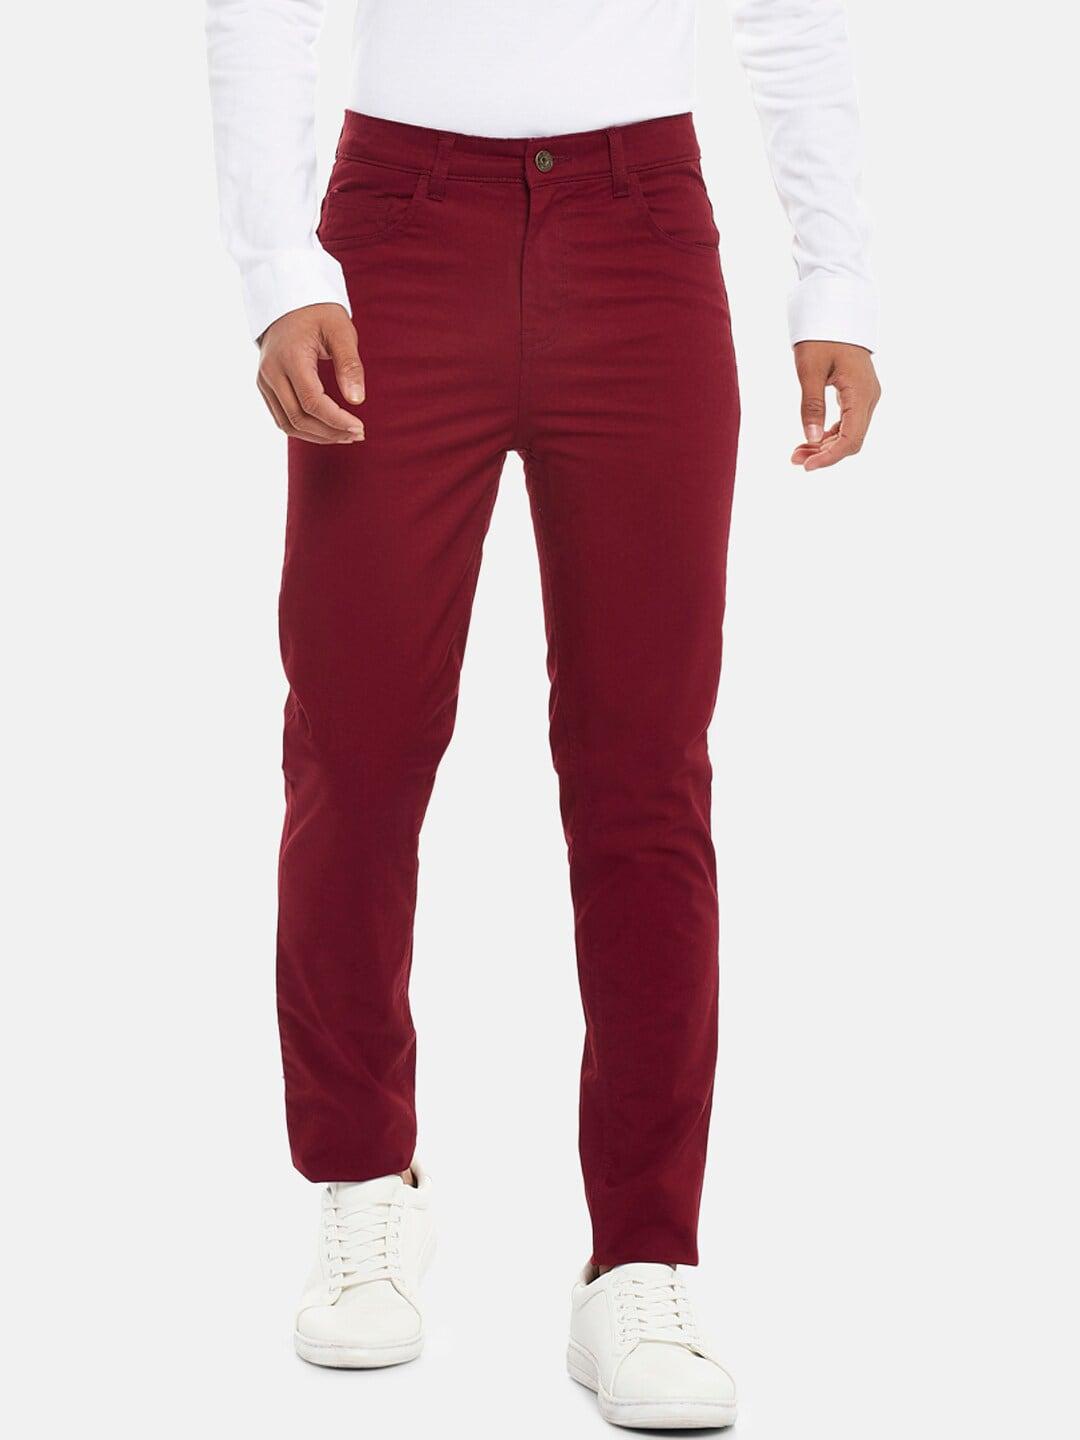 coolsters by pantaloons boys maroon chinos trousers